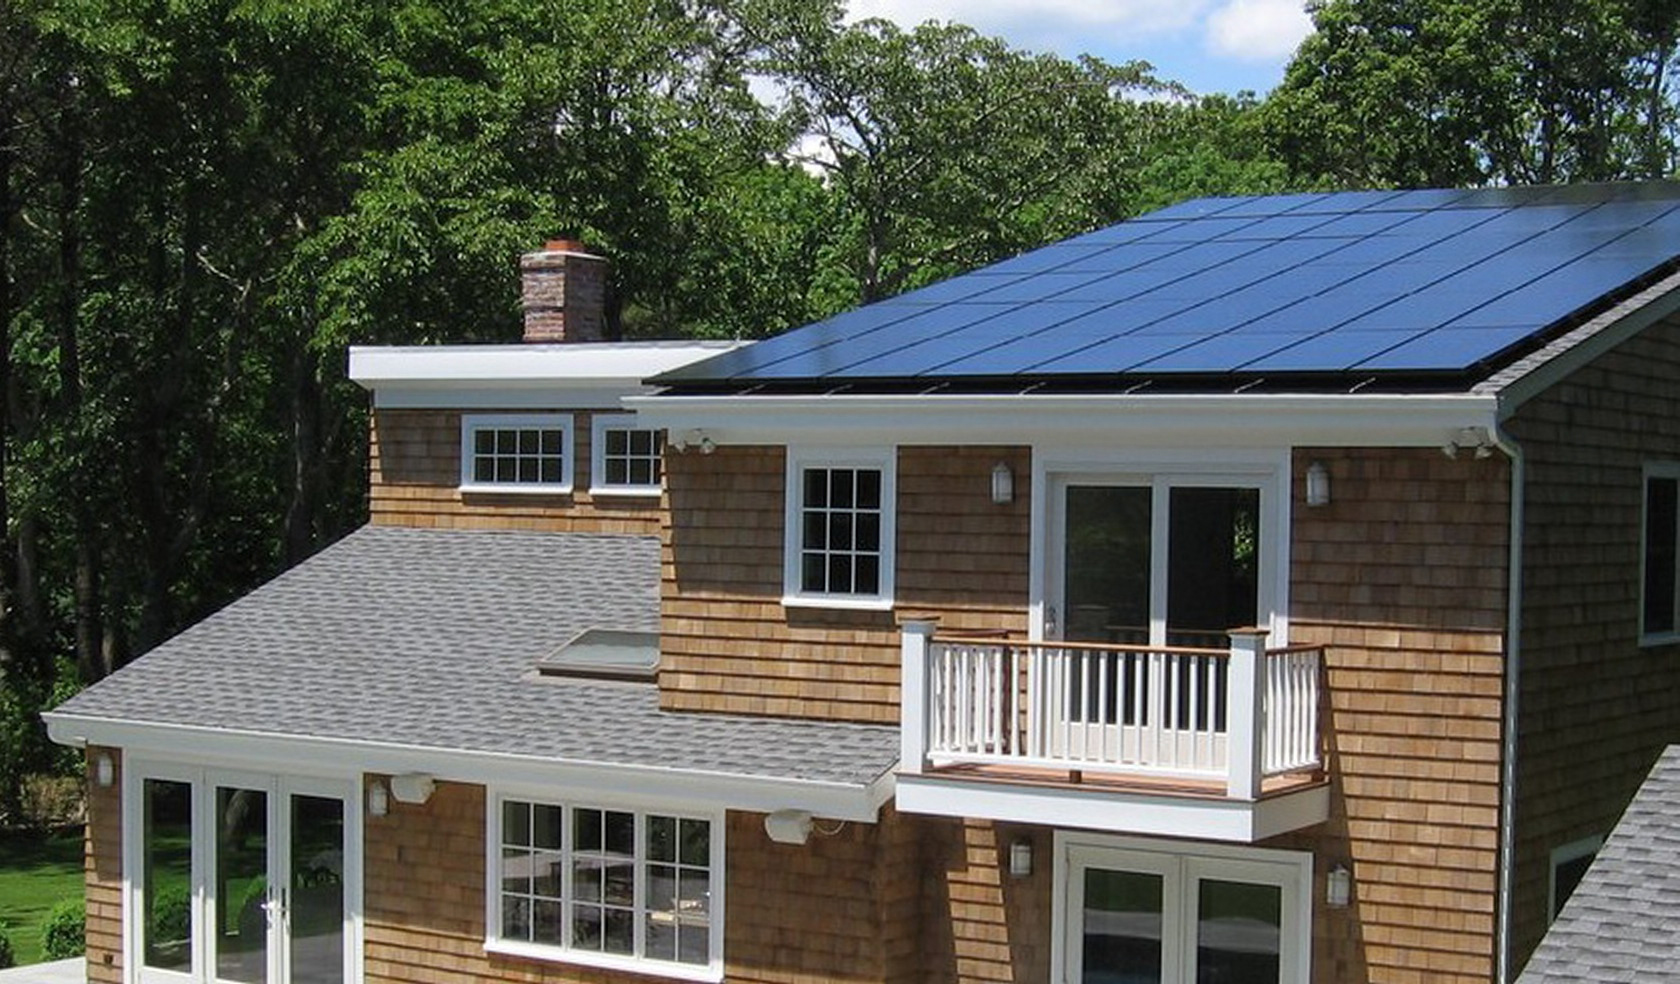 Photo of house with solar panels